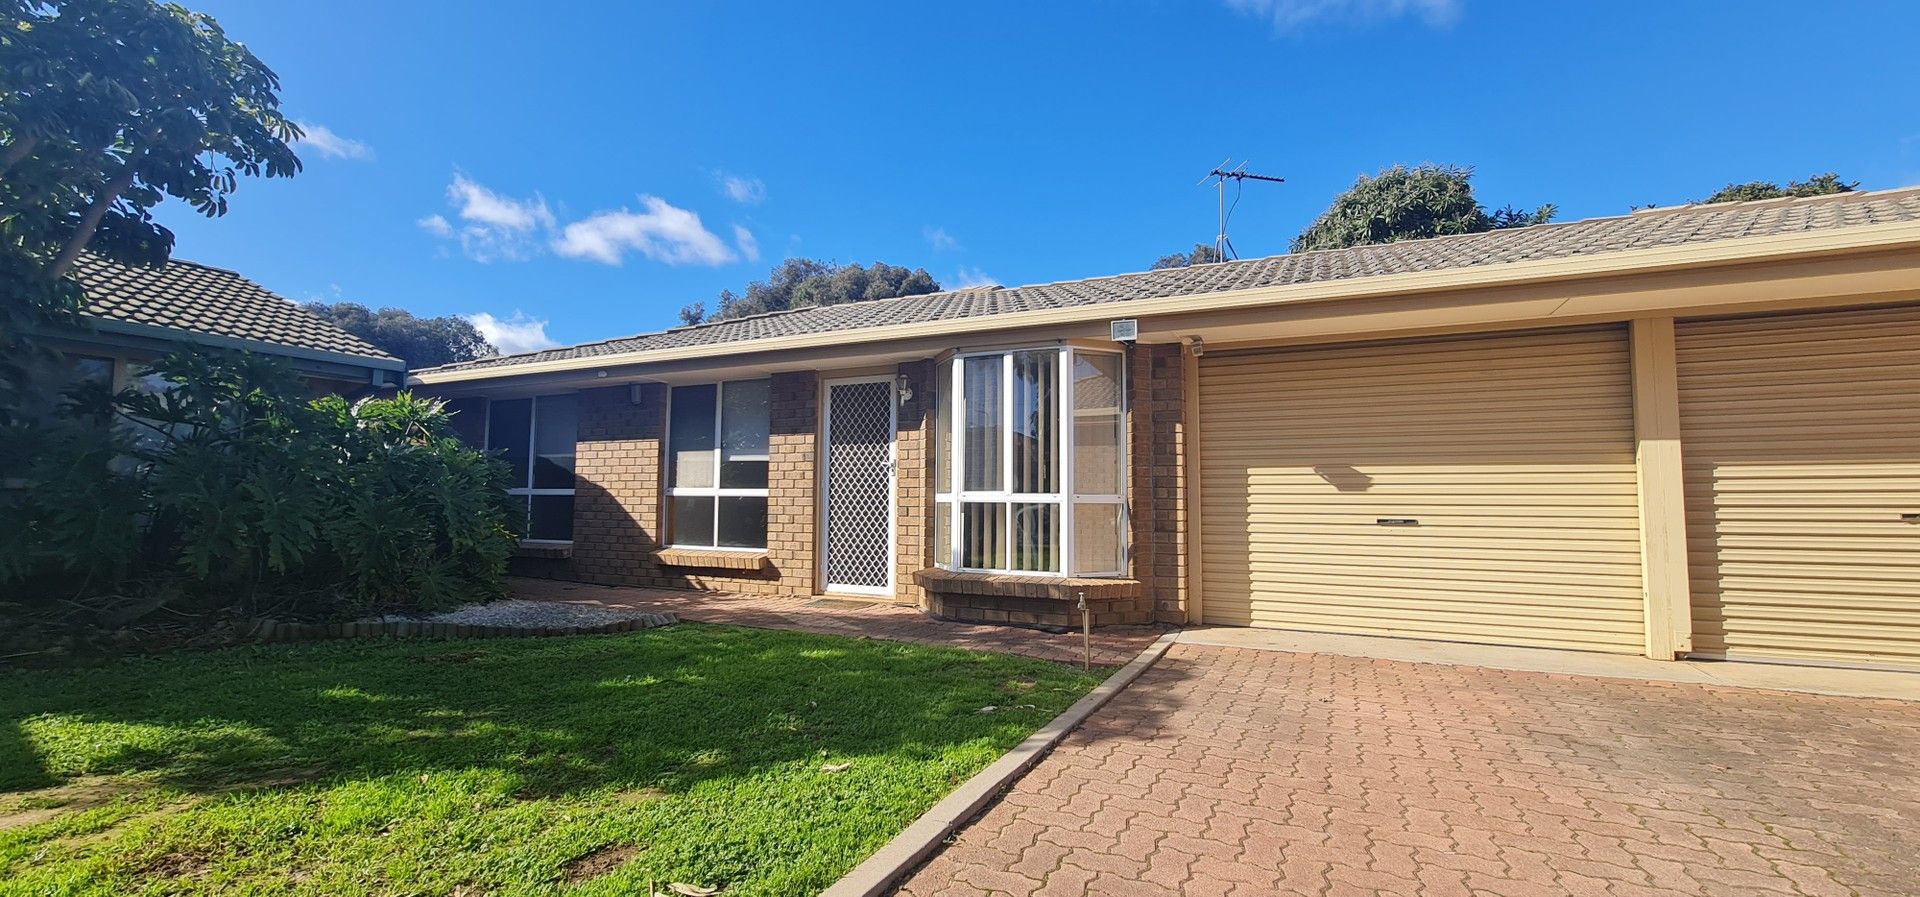 3/238-240 Whites road, Paralowie SA 5108, Image 0